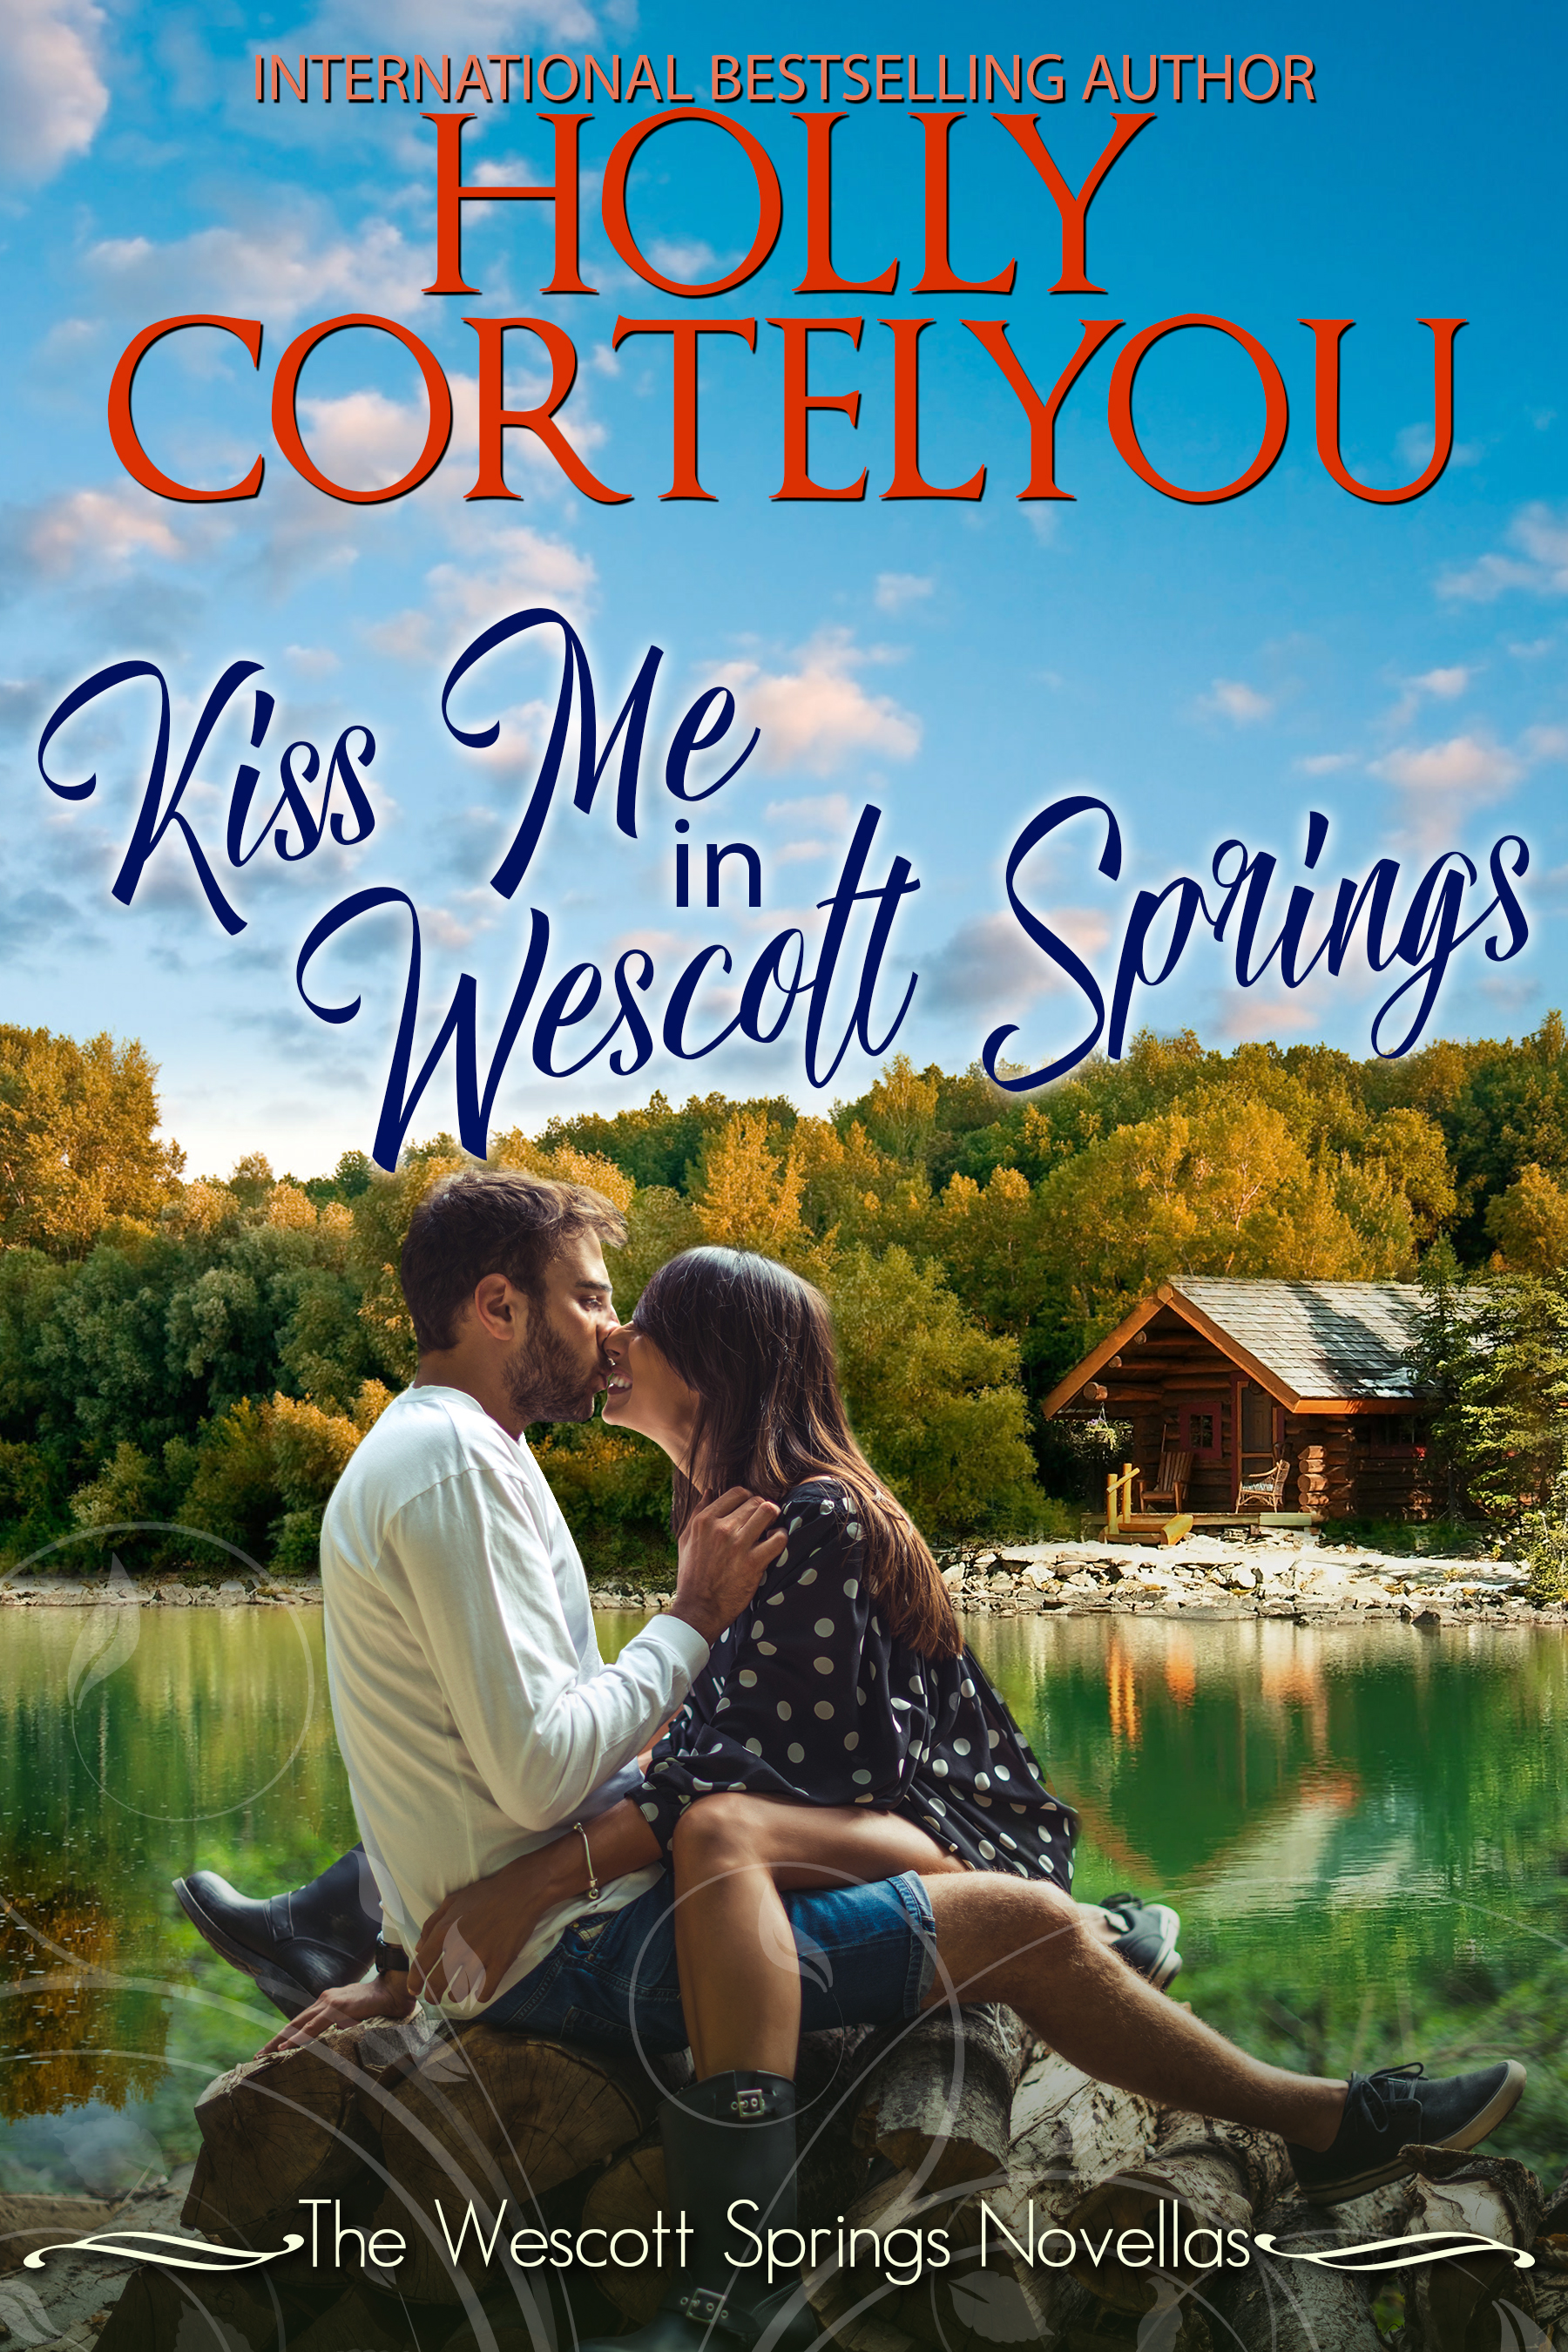 FREE: Kiss Me in Wescott Springs by Holly Cortelyou